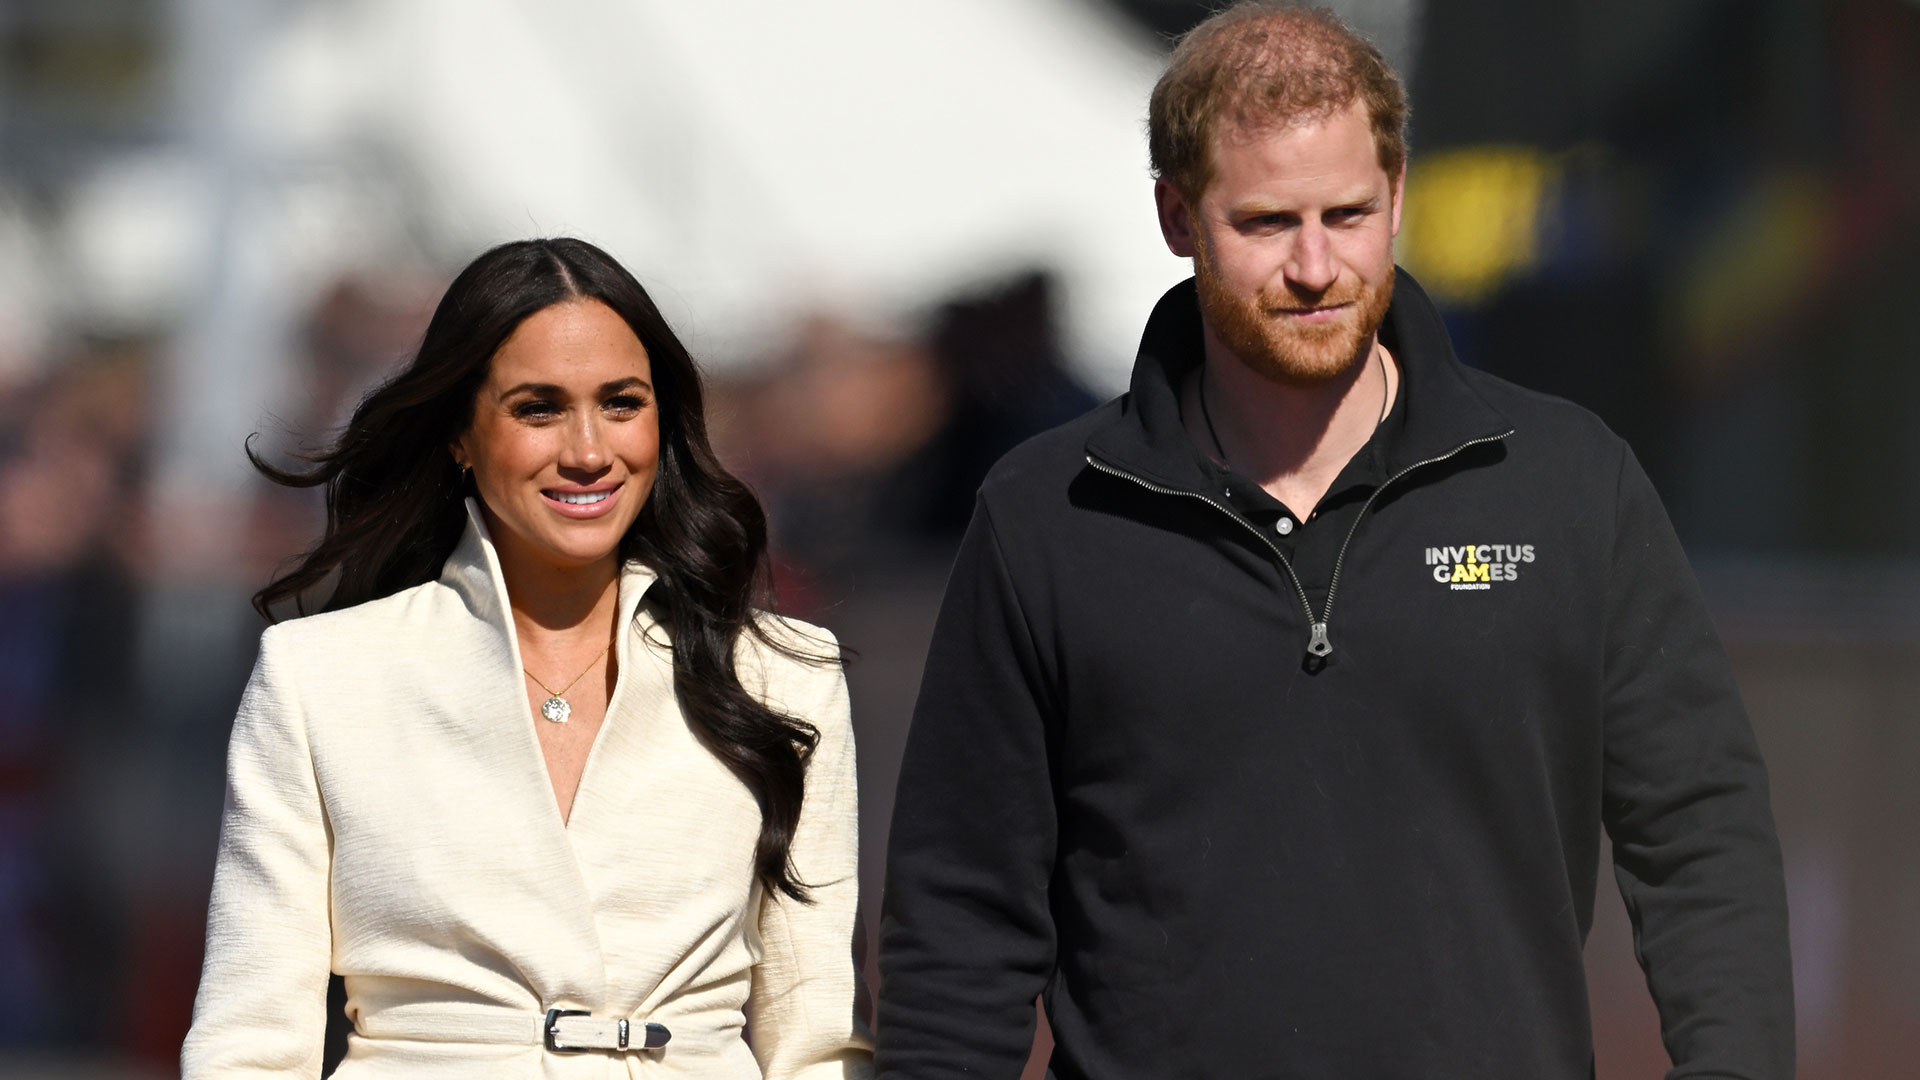 What’s the age gap between Meghan Markle and Prince Harry?